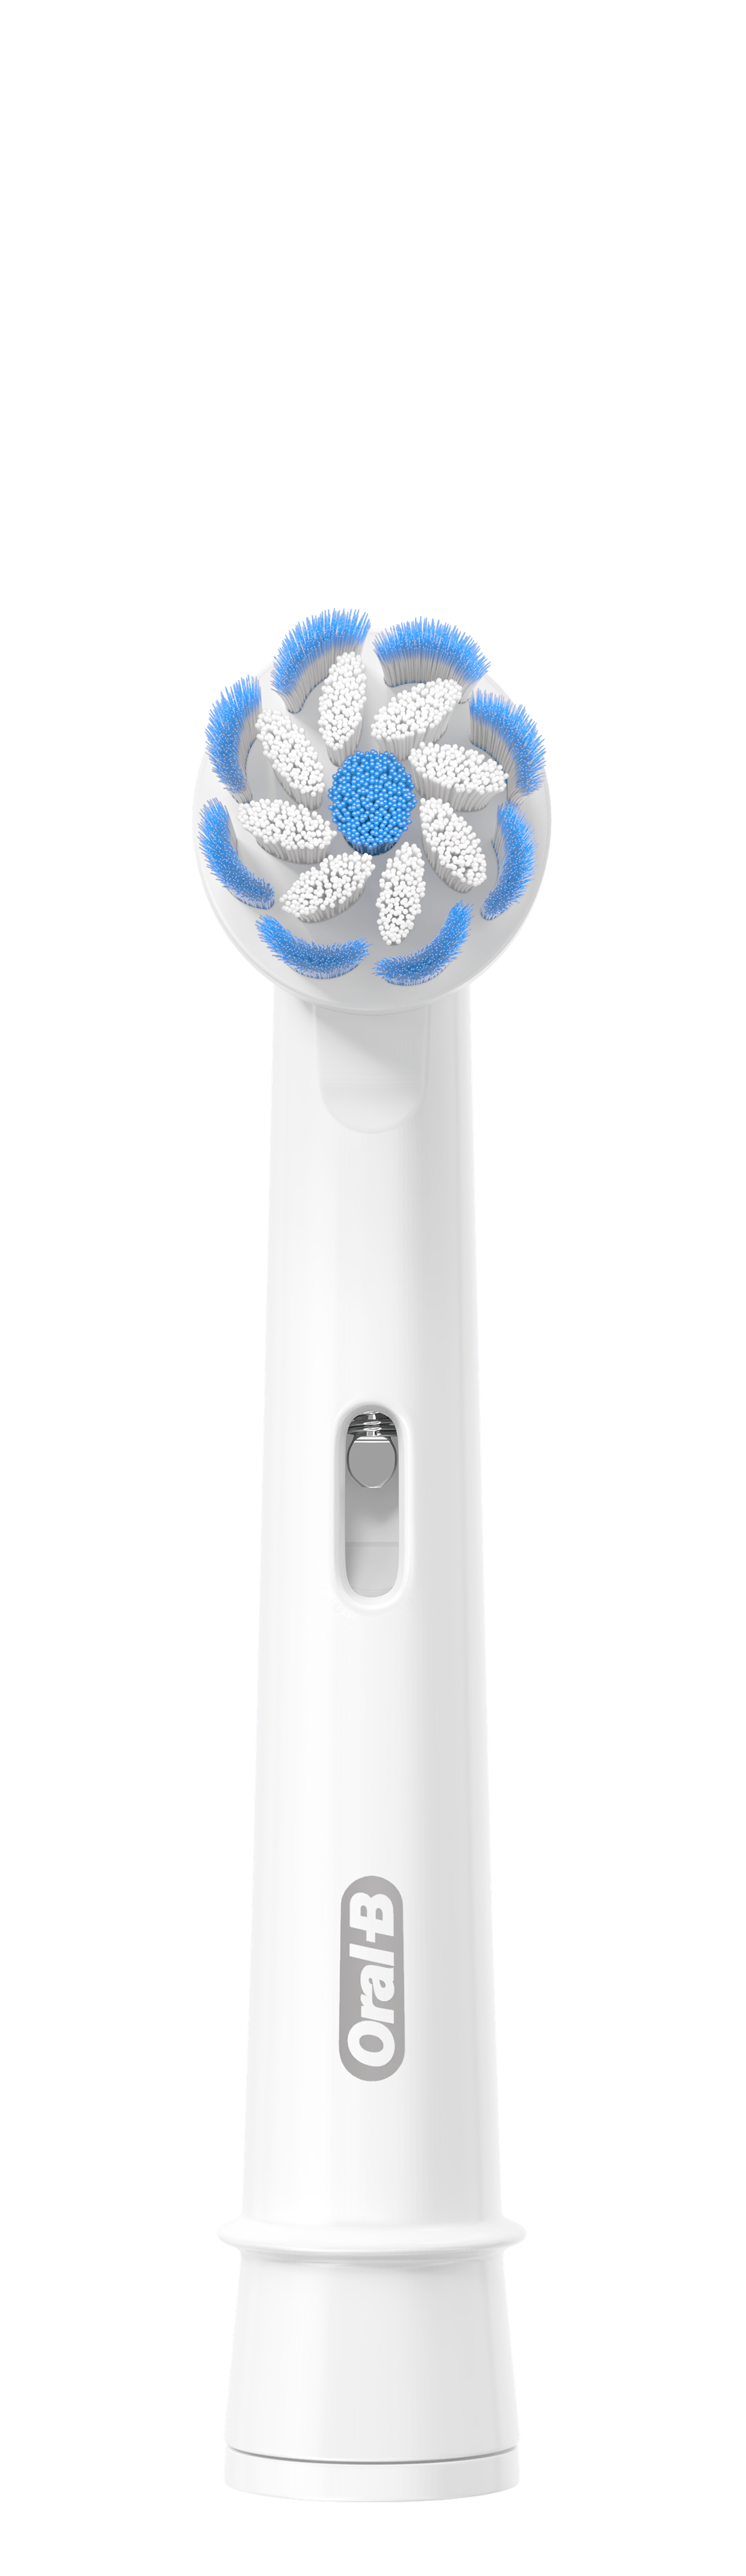 Oral-B Sensi Ultra-Thin Electric Toothbrush Heads undefined